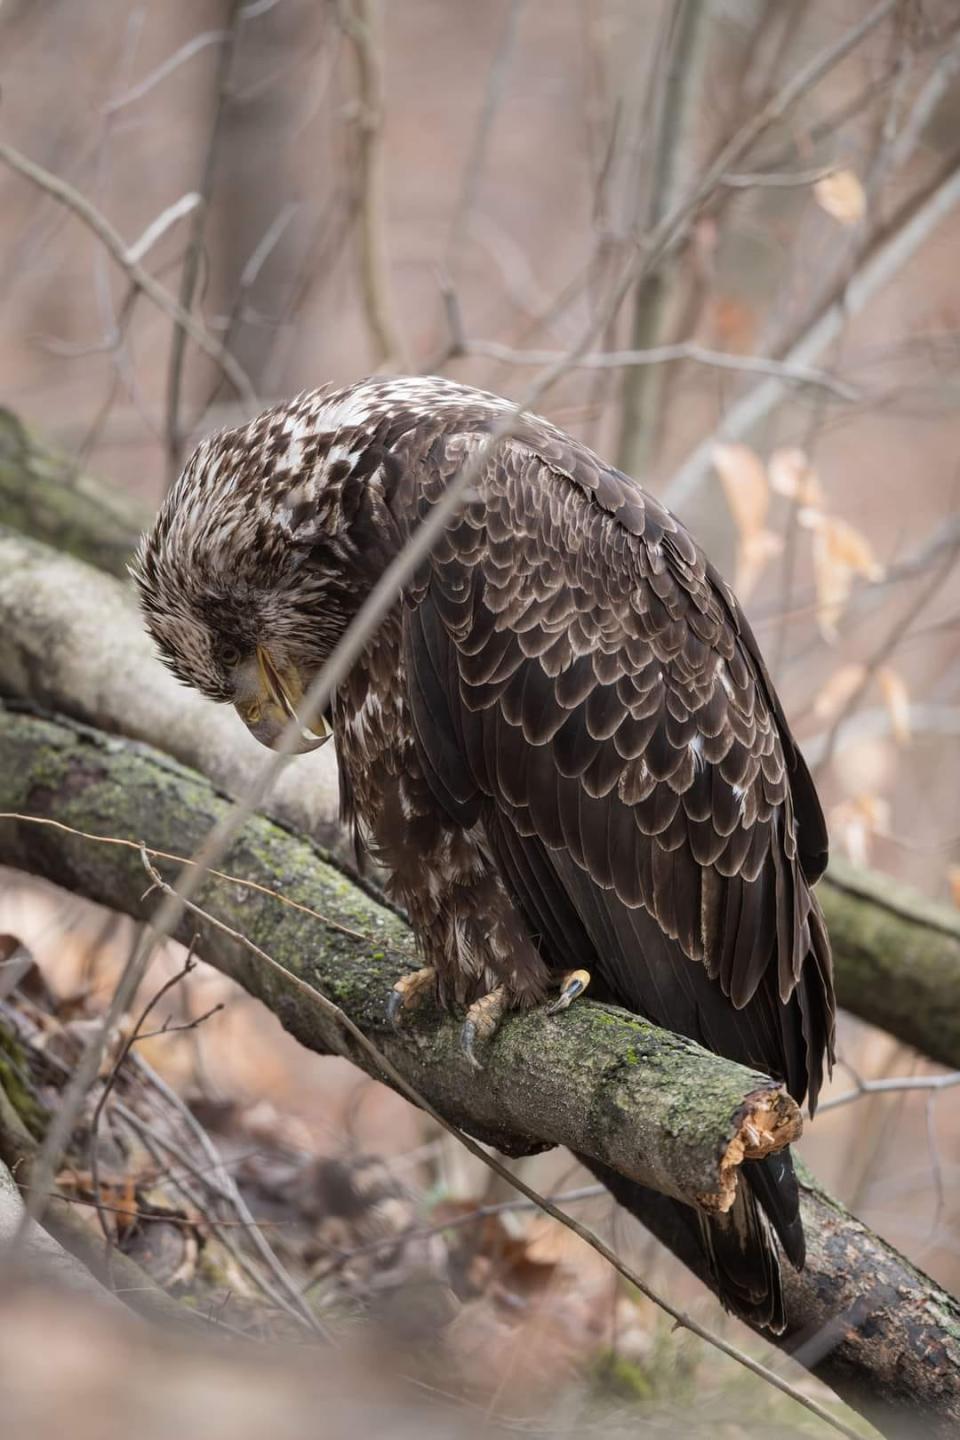 Jeff Basham of South Bend took this photo of the sub-adult bald eagle at Potato Creek State Park in North Liberty on Jan. 29, 2024, shortly before a volunteer took the bird to Humane Indiana Wildlife in Valparaiso, where it was found to have lead poisoning and died.